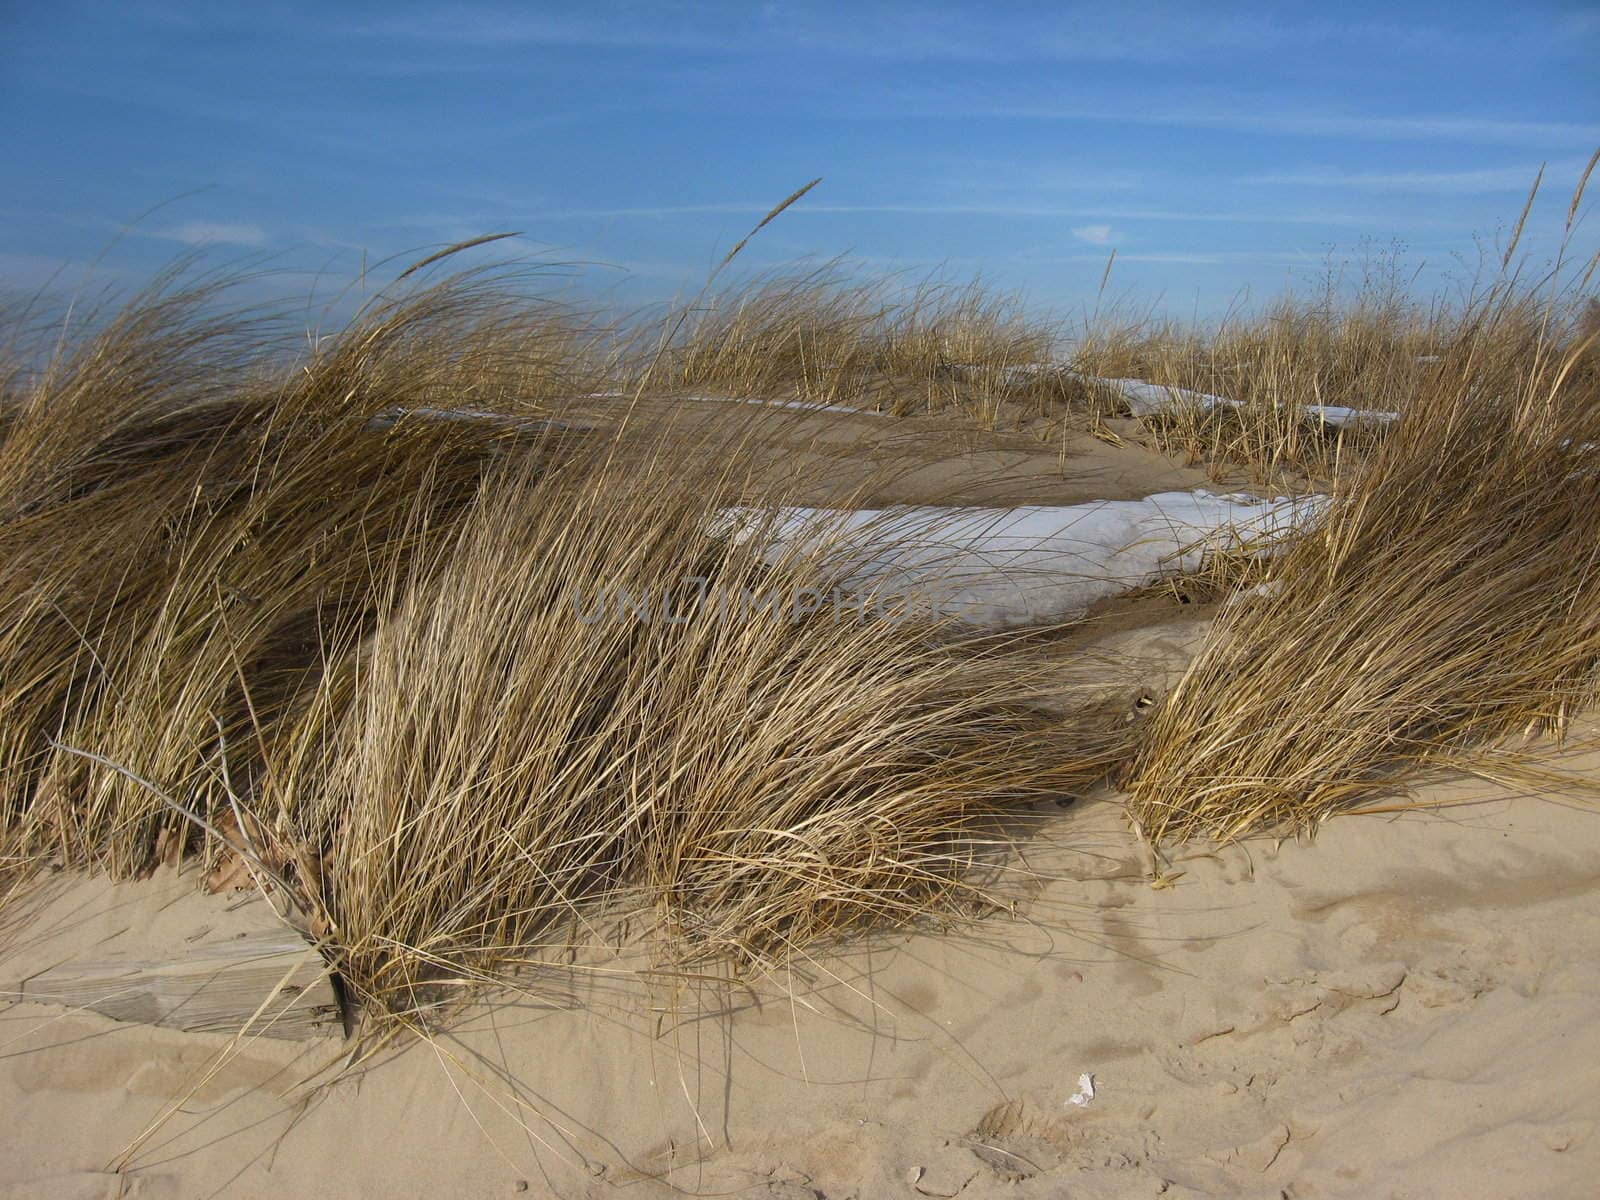 Beach Grass, Blowing in the Winter Wind #2 by loongirl